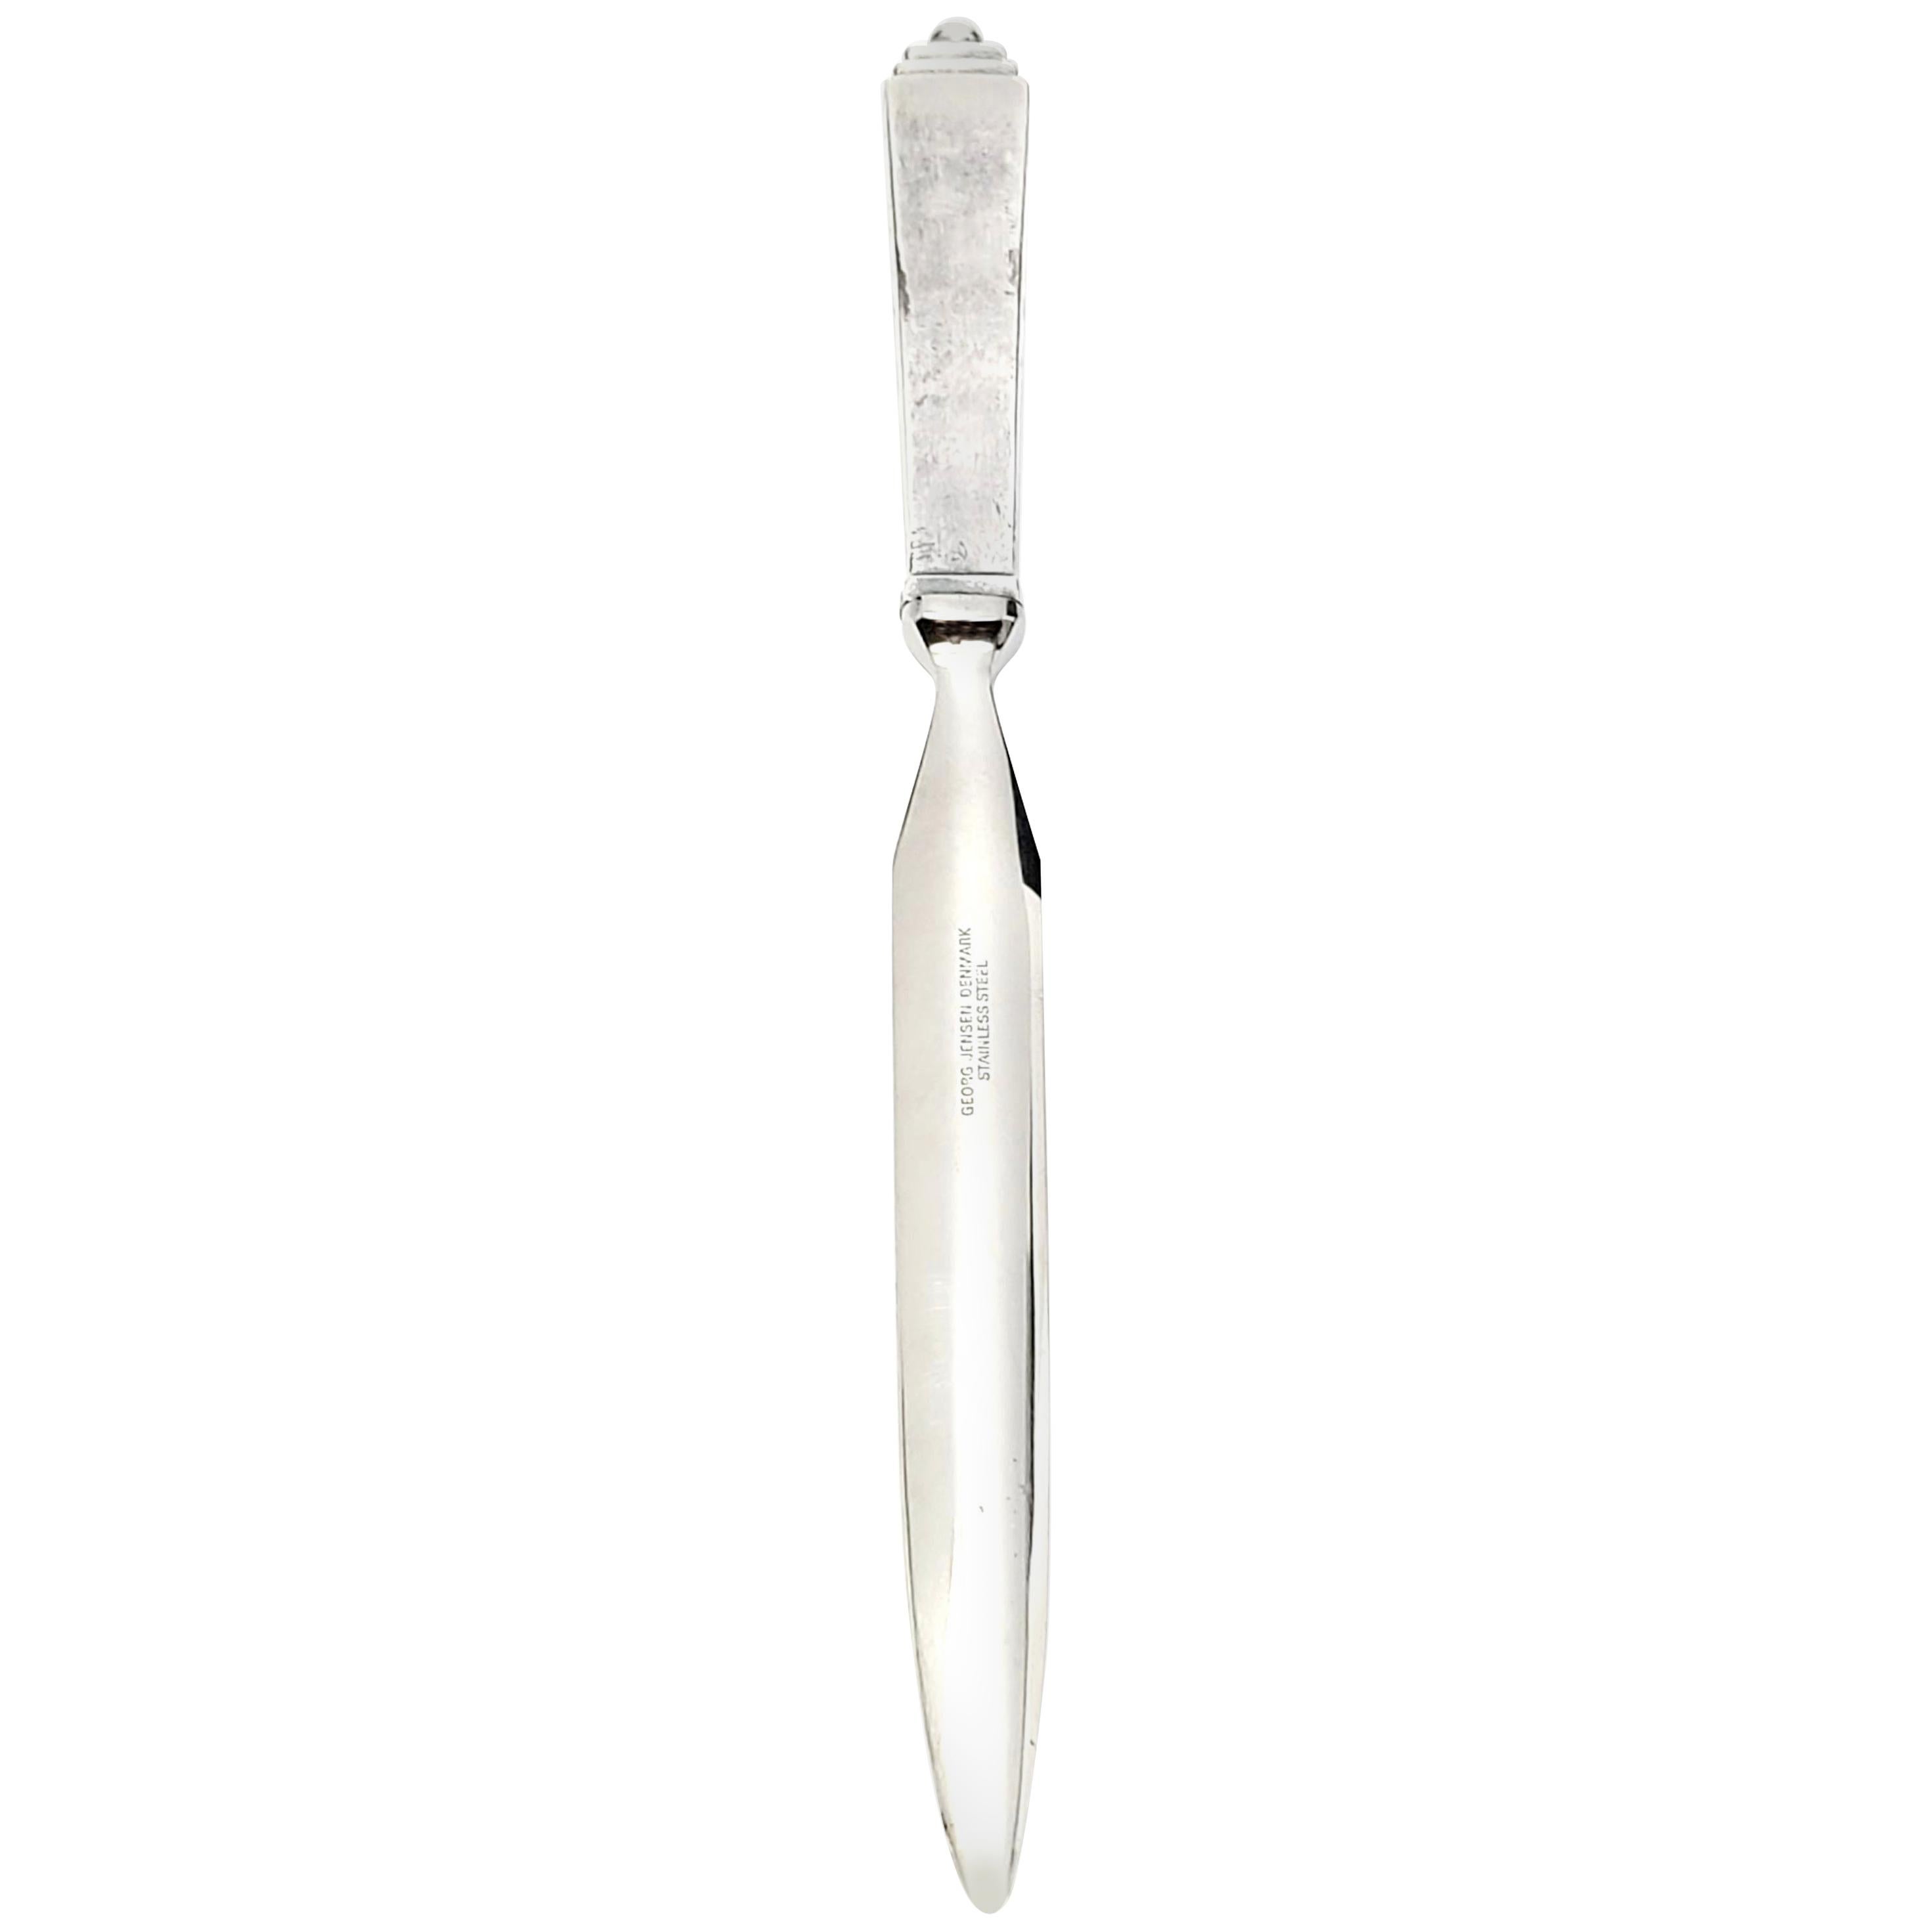 Georg Jensen Pyramid Silver Plated Letter Opener